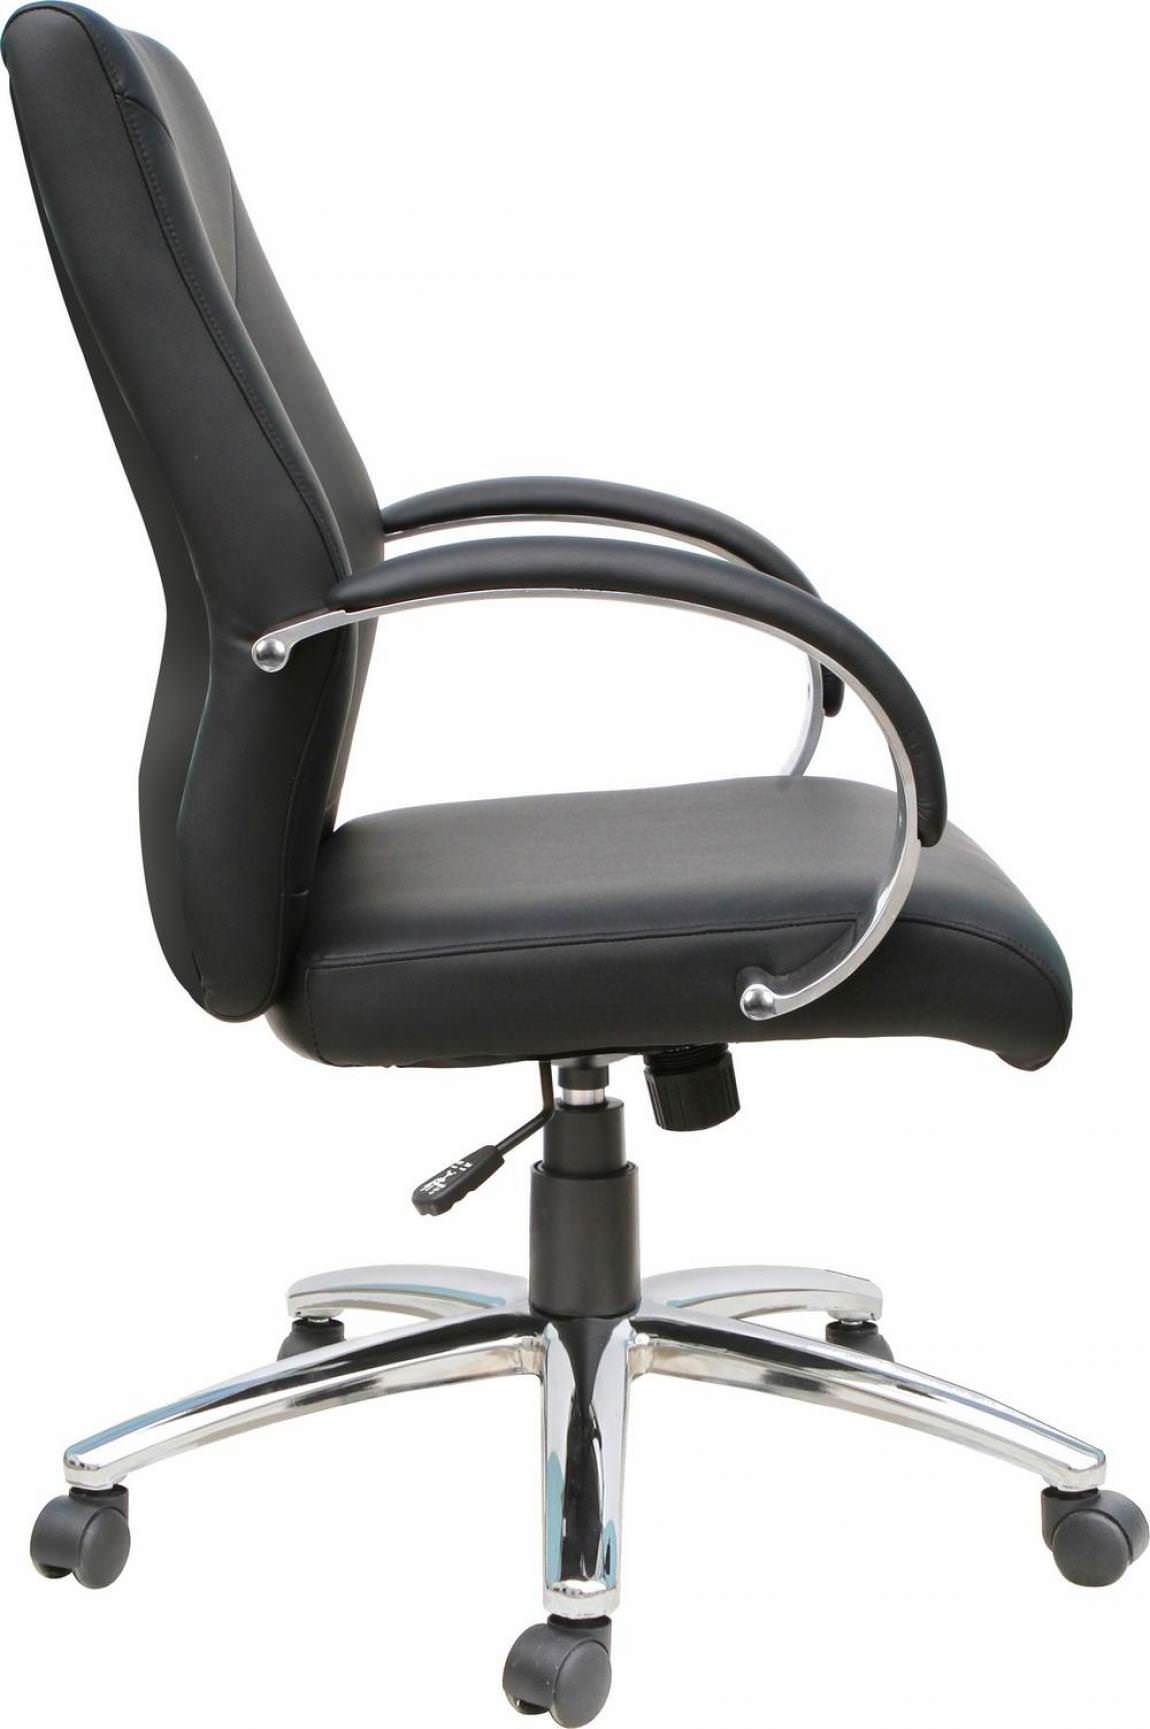 Stylish Management & Conference Room Aluminum Cast Chair